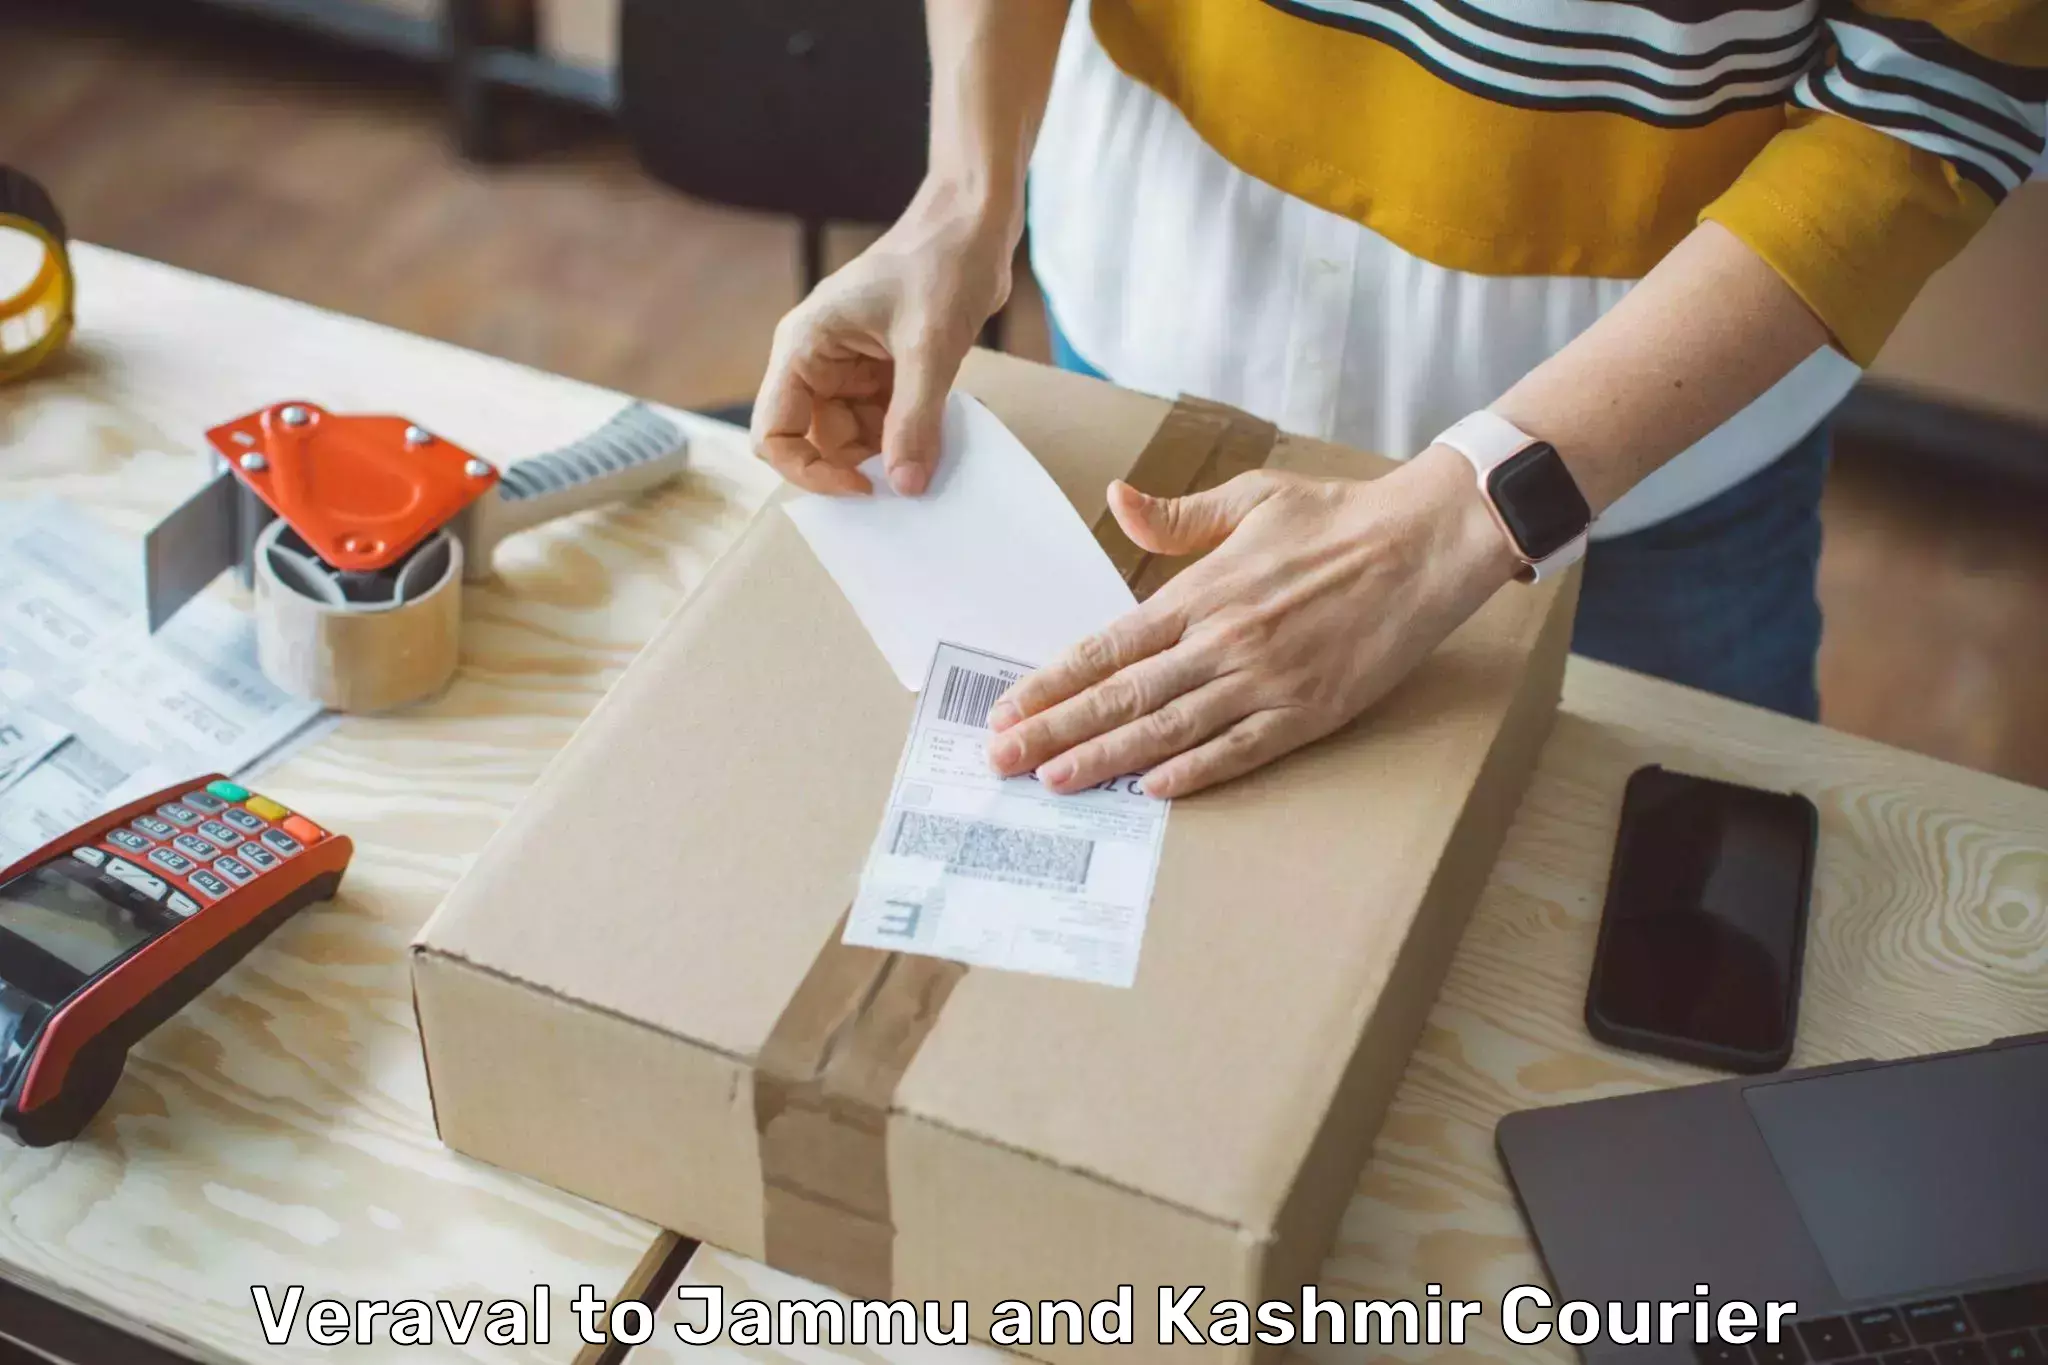 On-call courier service Veraval to Jammu and Kashmir